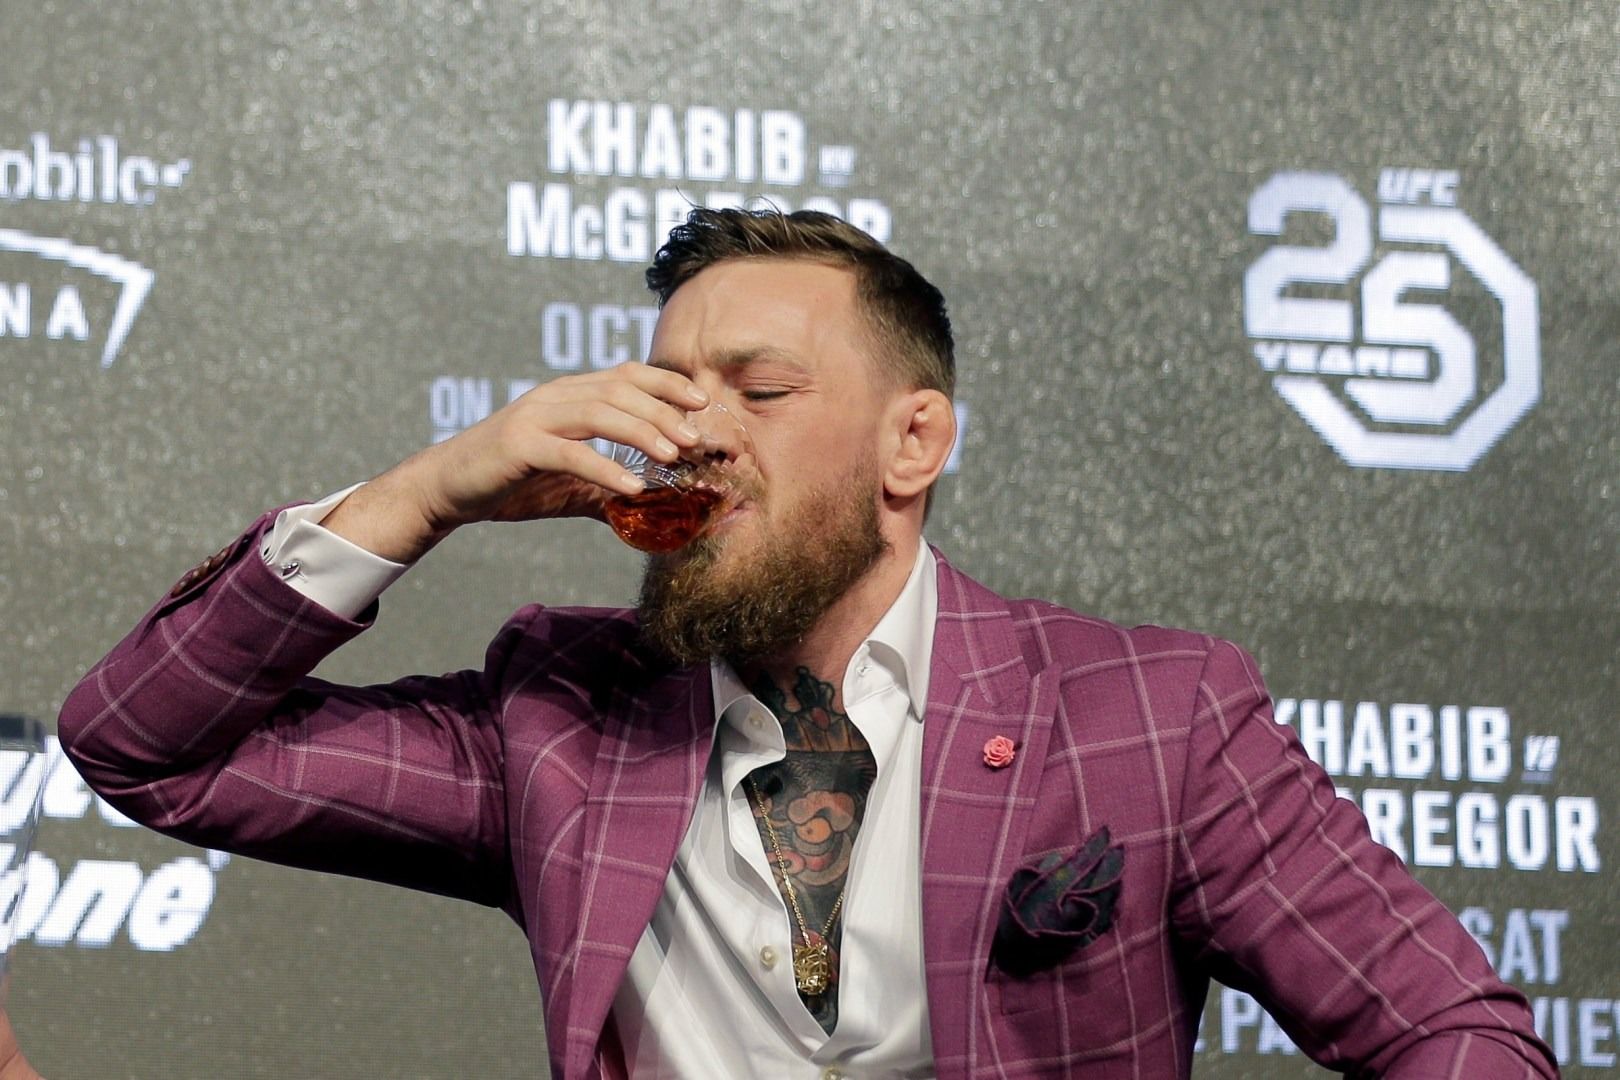 McGregor Loses Motivation Due To Fight Delays, Turns To Drinking